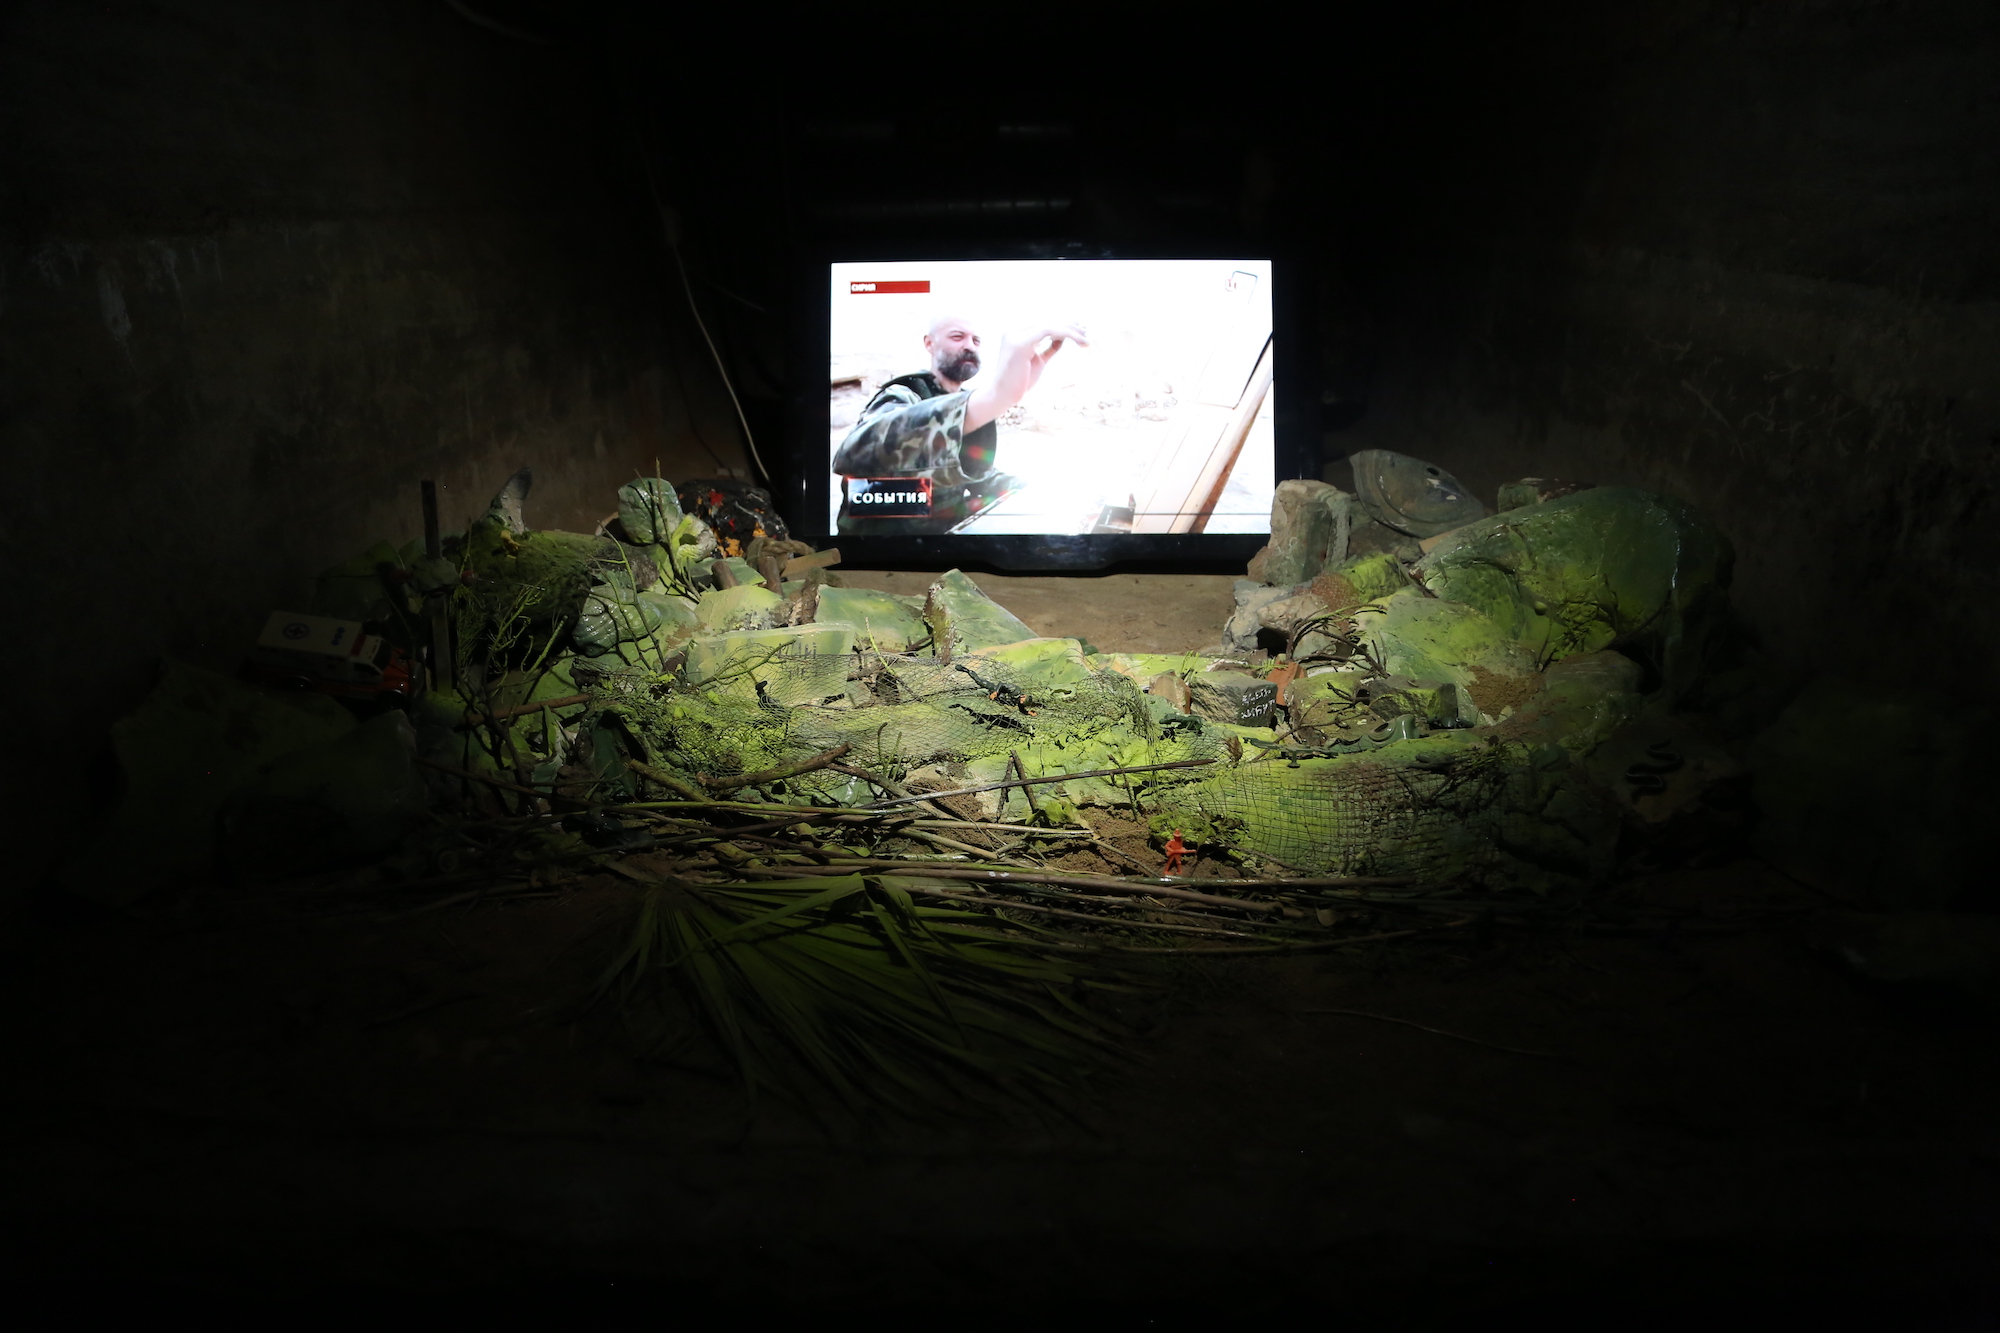 Technologies of Presence installation, 2020. Photo: Tatyana Chernomordova. The project makes a prediction that the occupations of military officials, artists, and environmentalists will merge into one